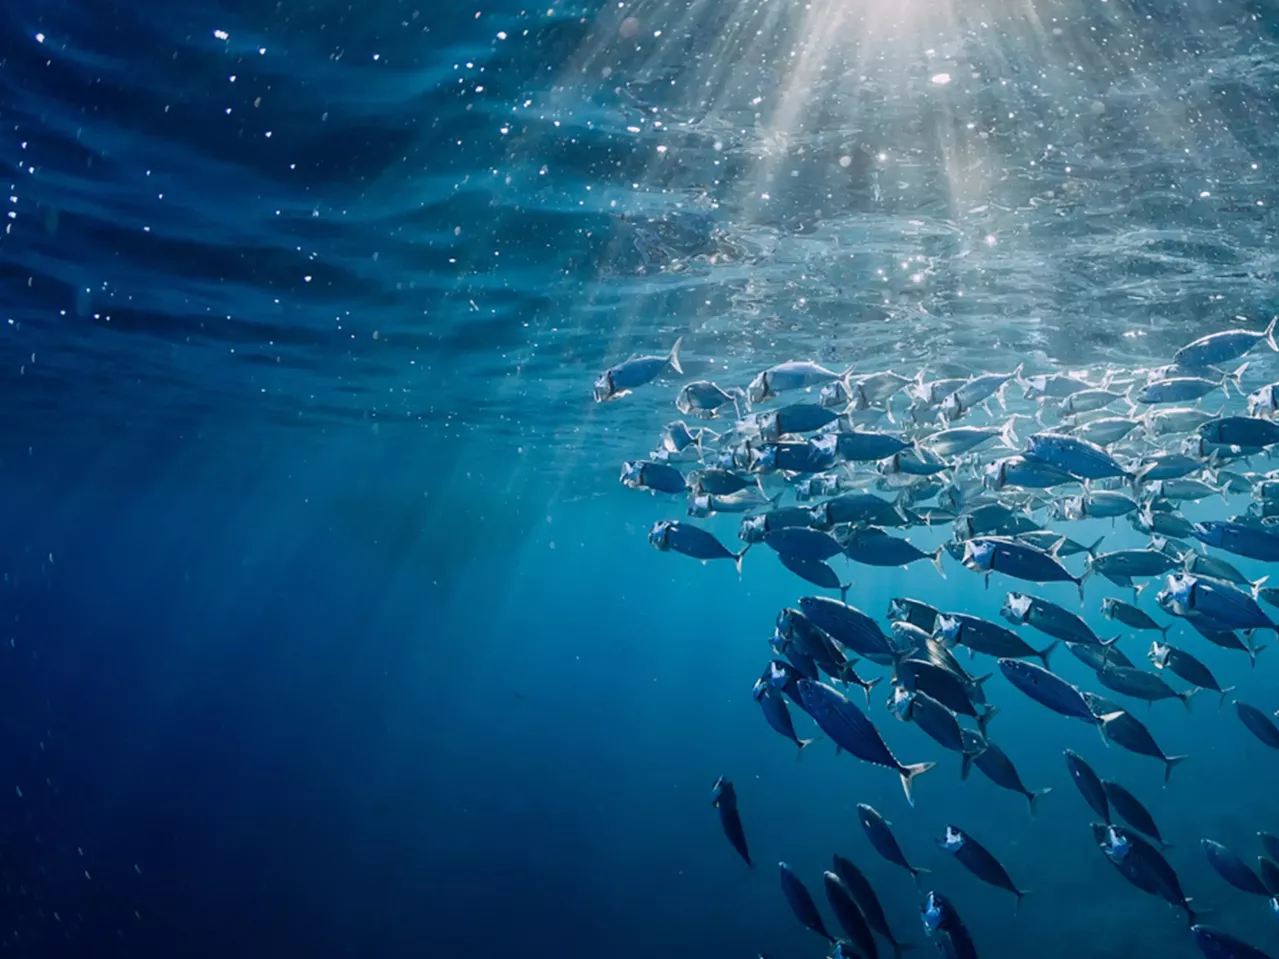 A large school of silver fish swimming in clean and safe ocean water, illuminated by rays of sunlight penetrating the surface.